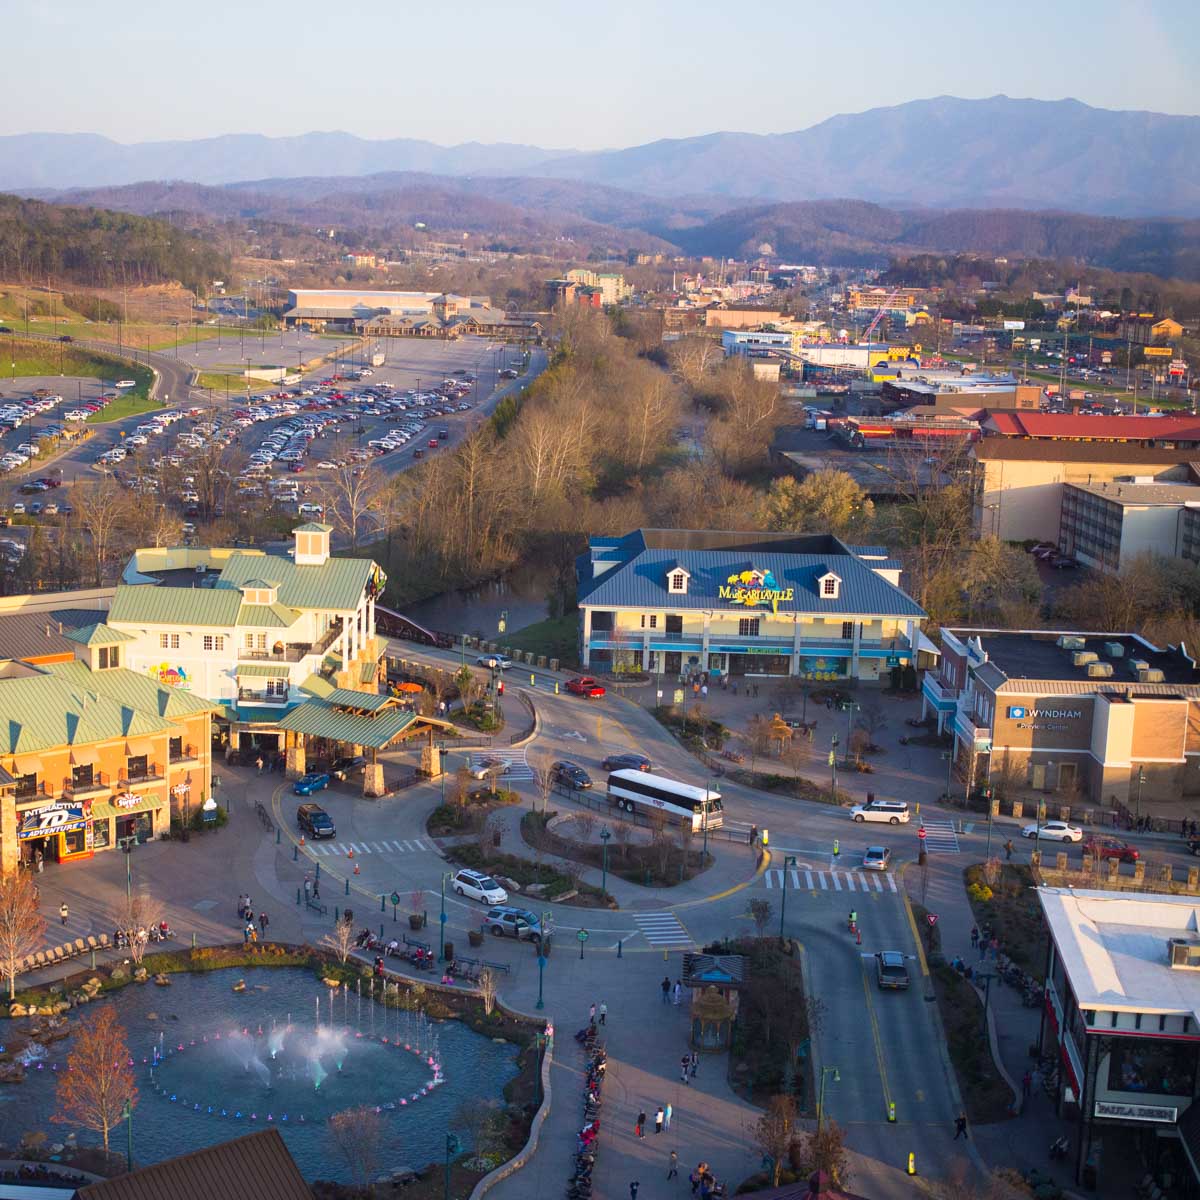 A view of the Great Smoky Mountains surrounding Pigeon Forge from the top of the Great Smoky Mountain Ferris Wheel.